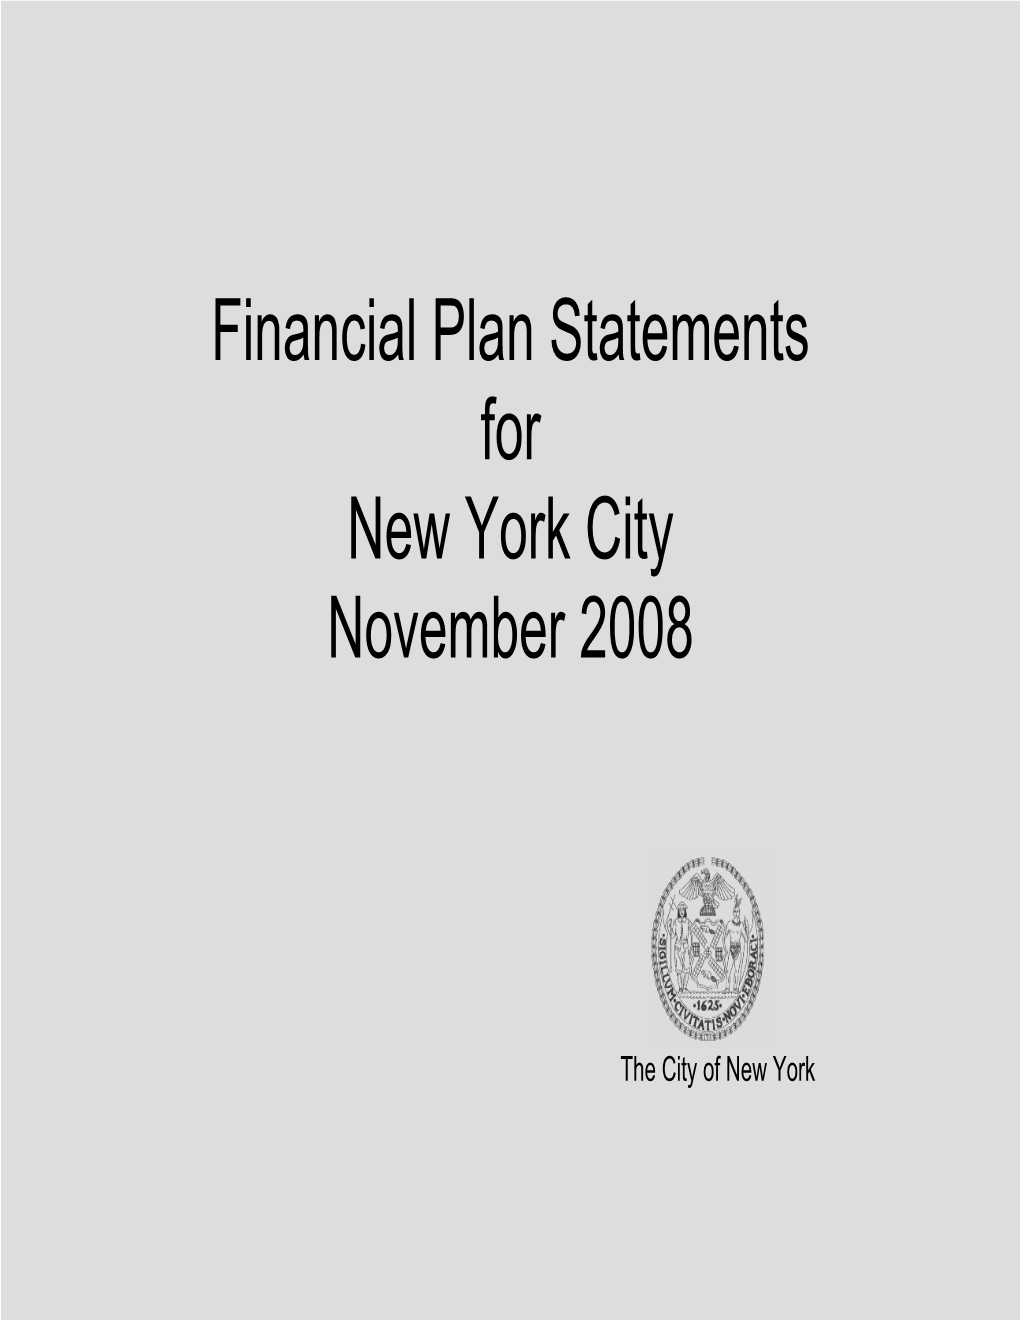 Financial Plan Statements for November 2008